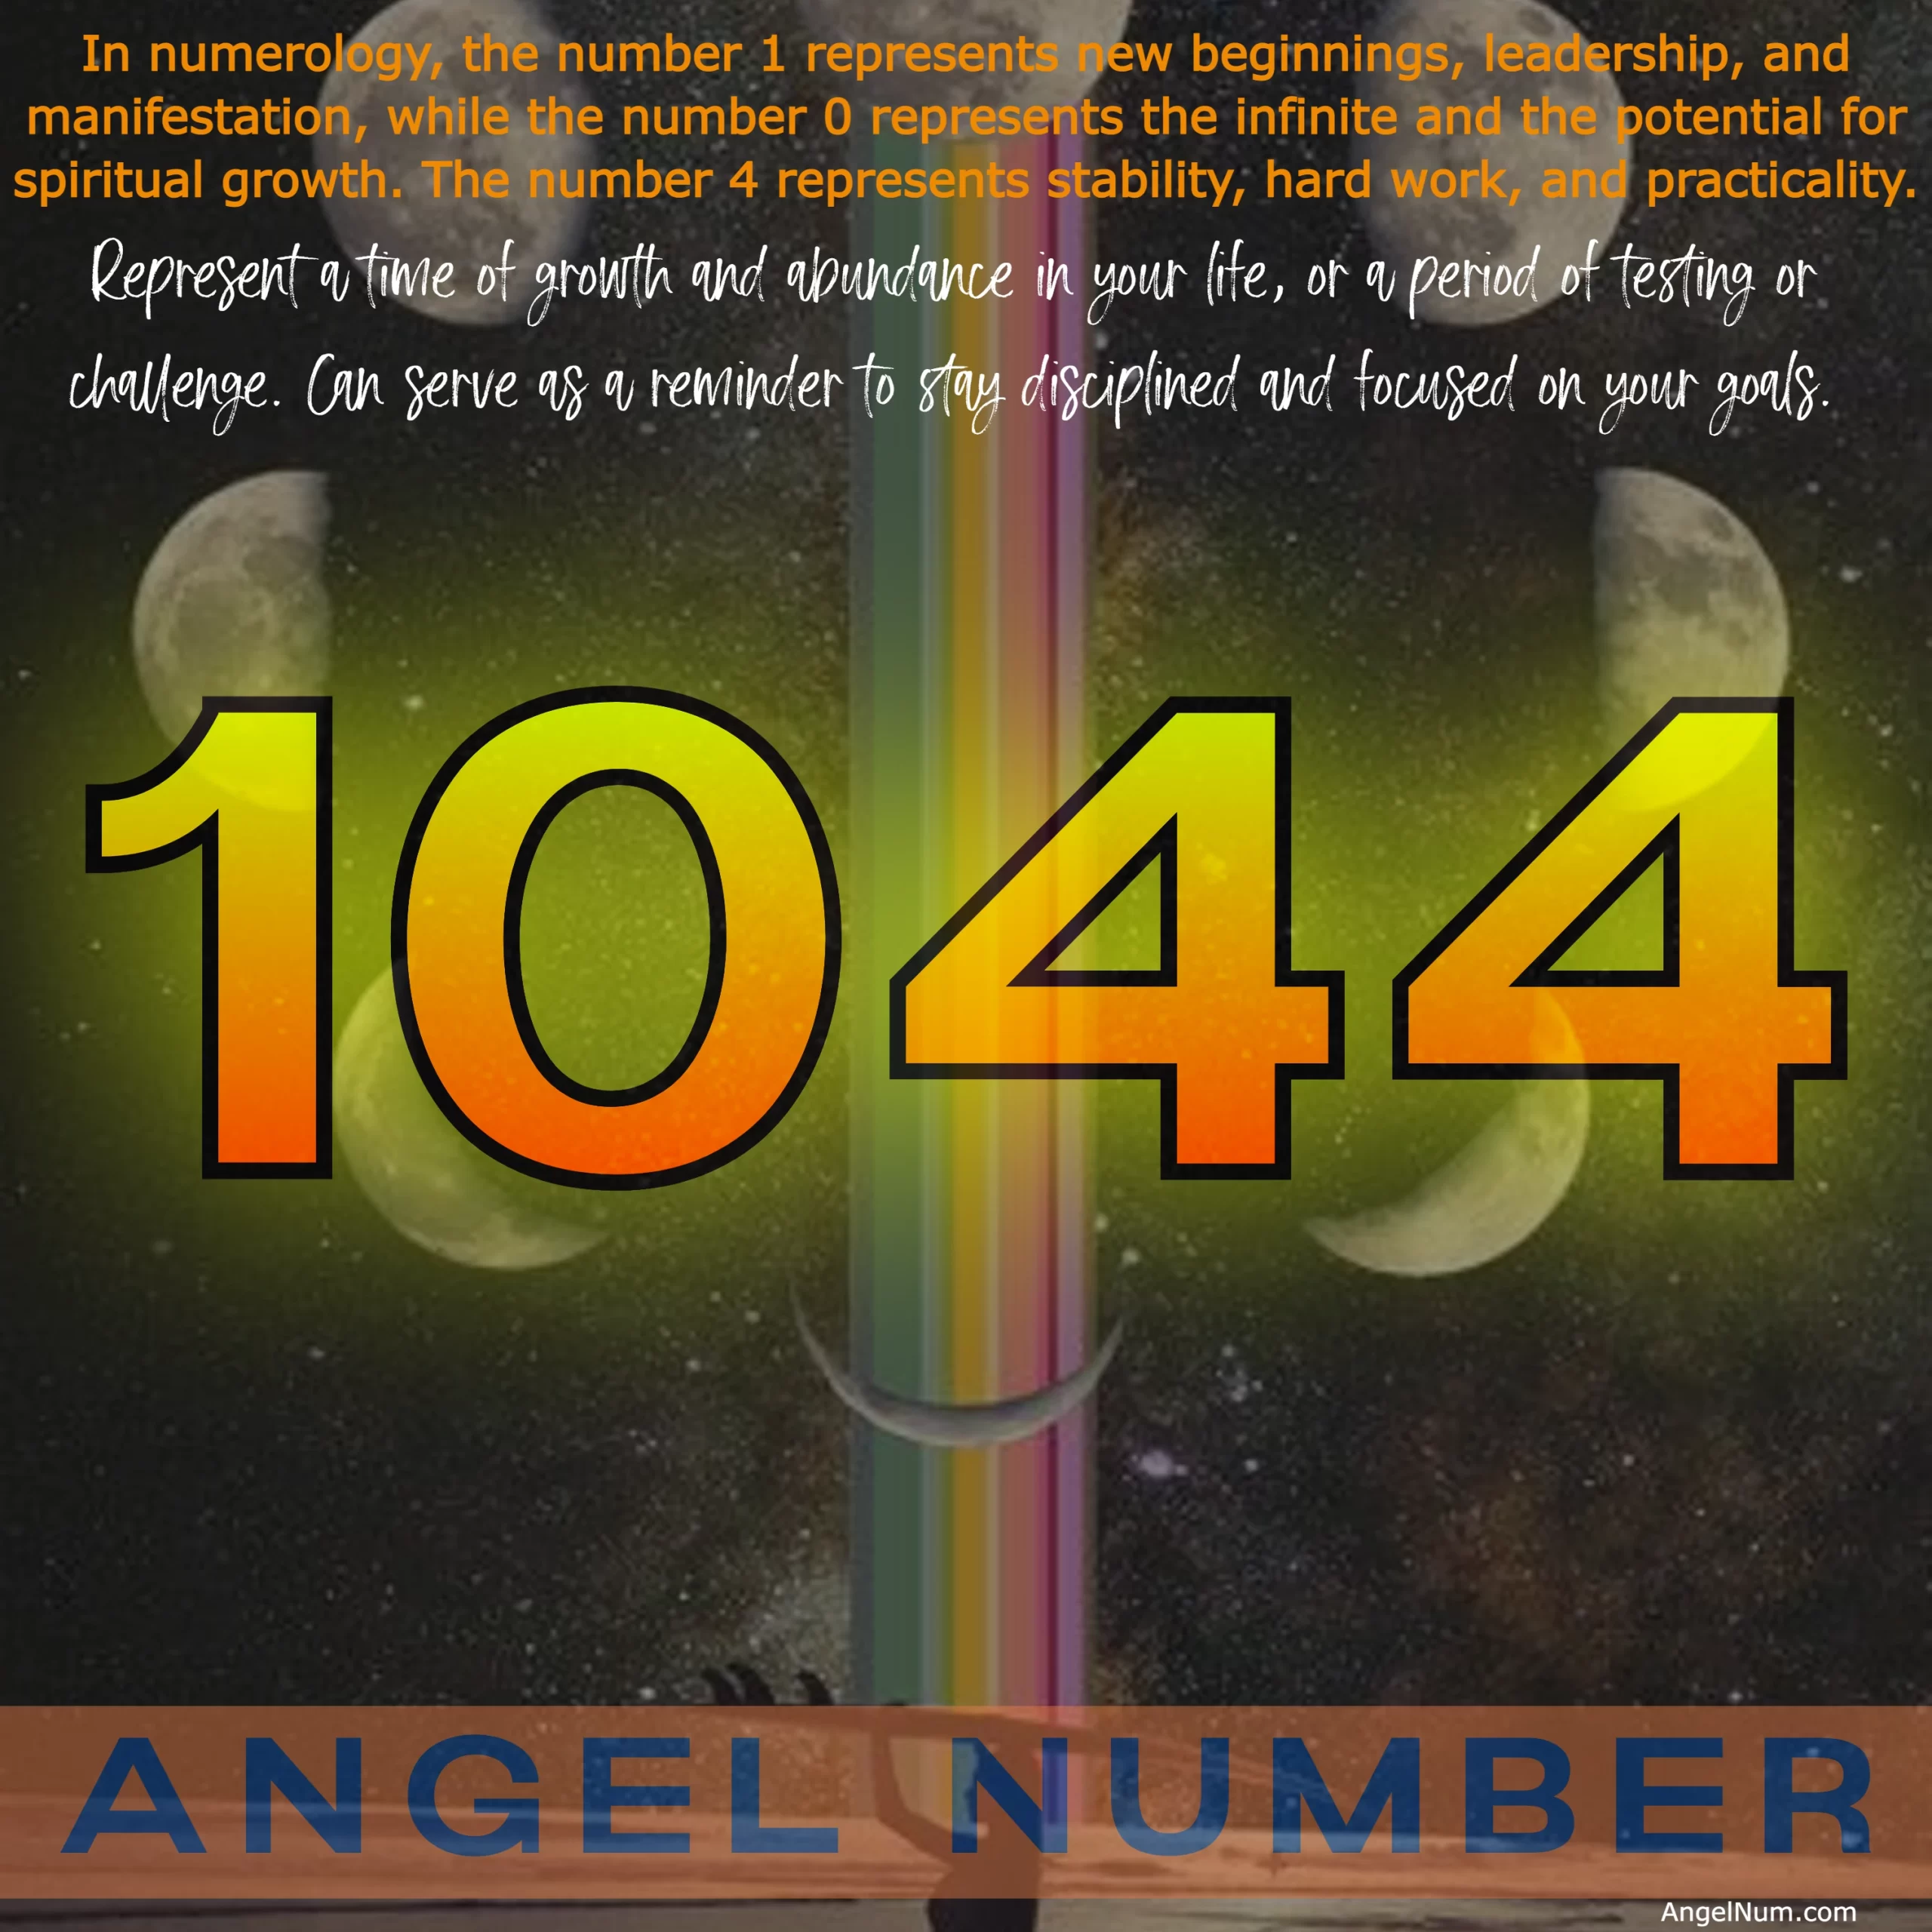 Discover the Meaning of Angel Number 1044 and How it Can Help You